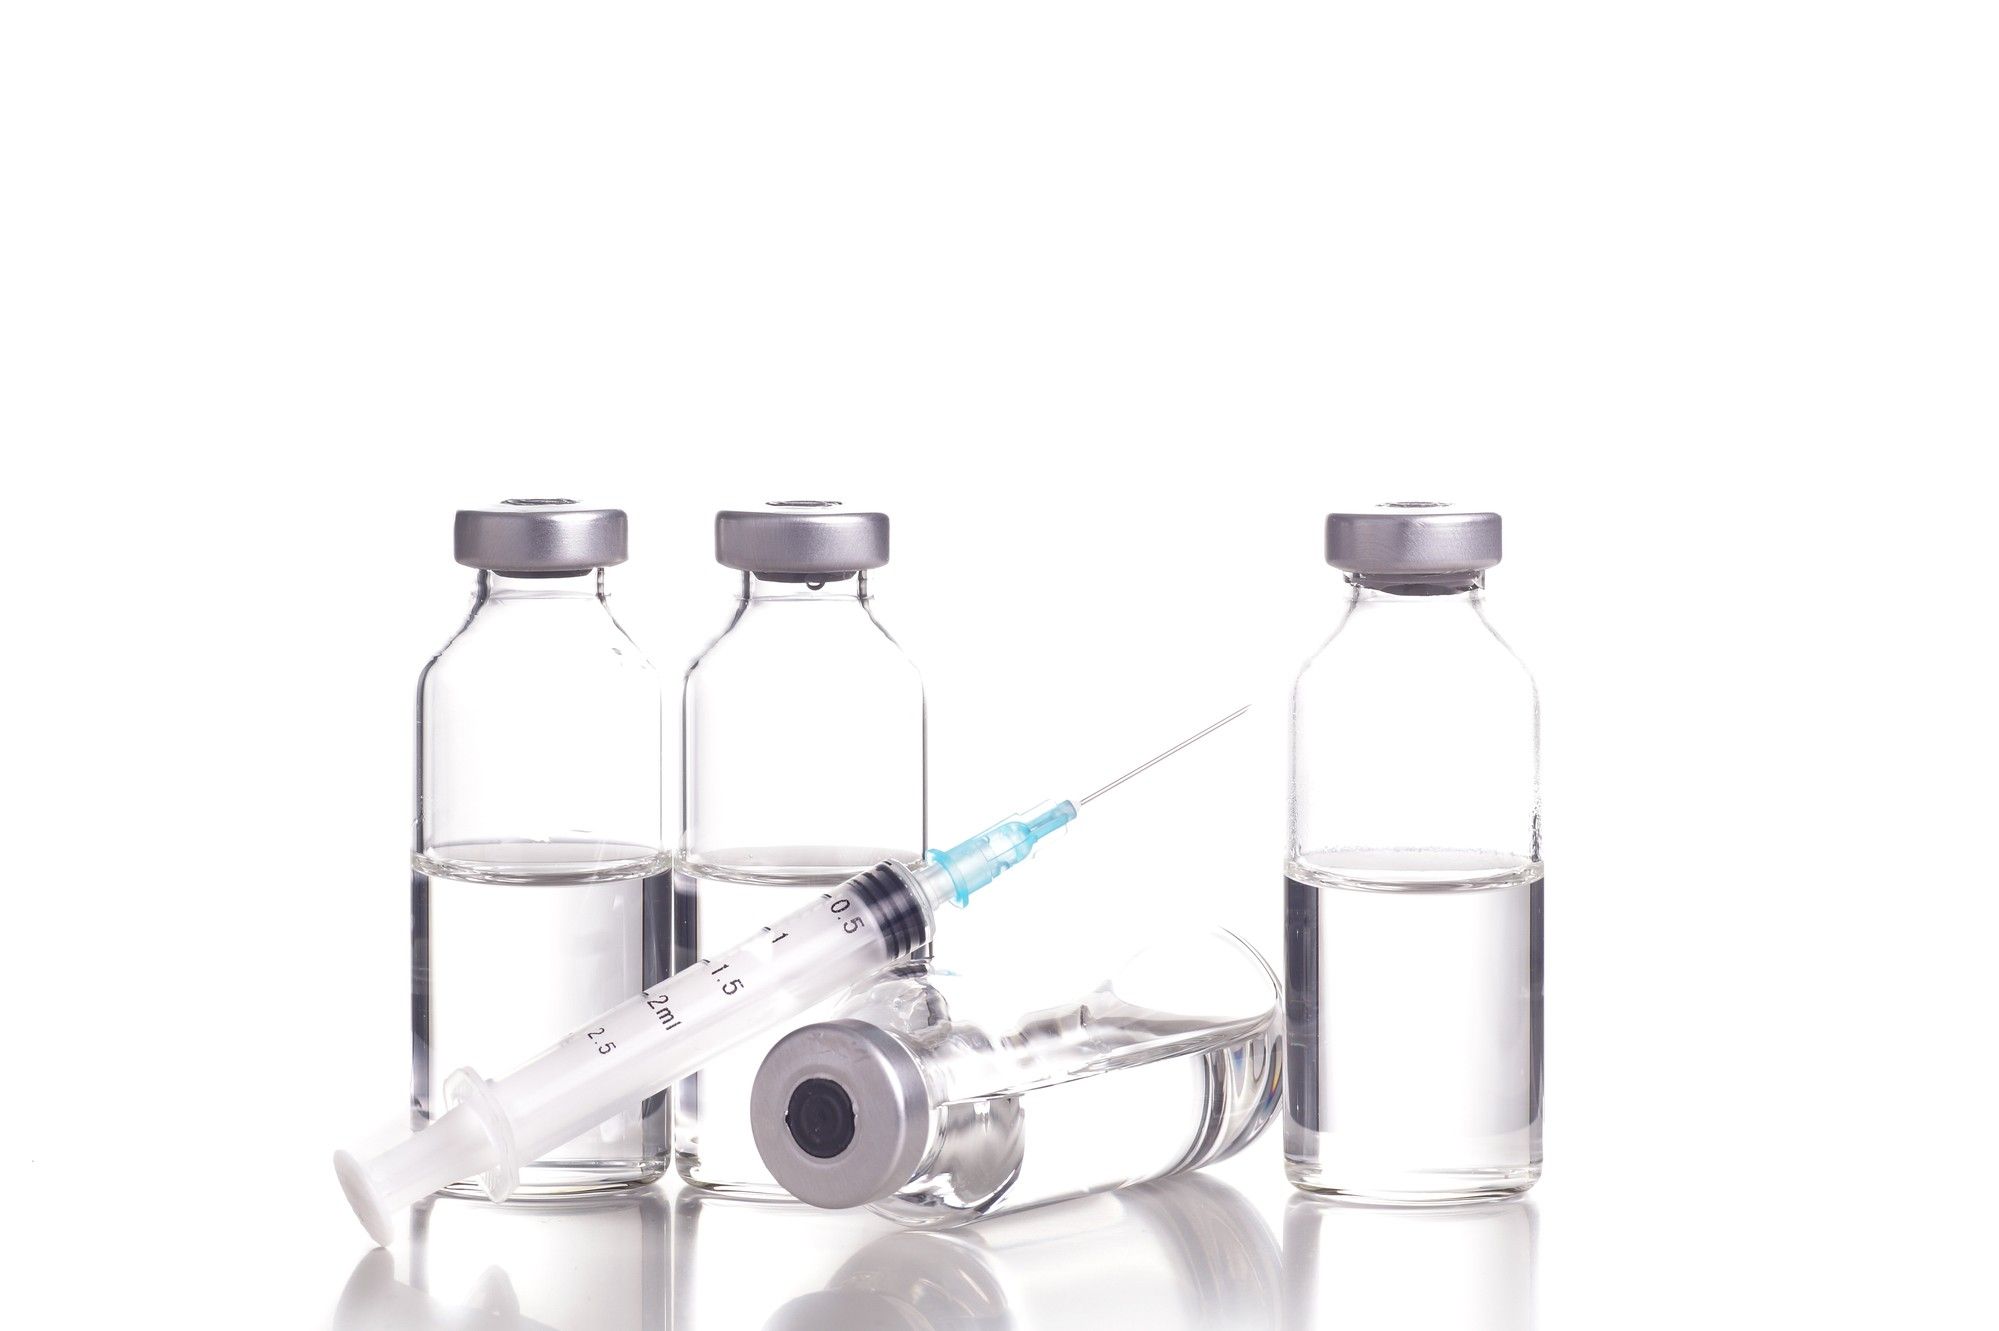 vaccination vials and syringe